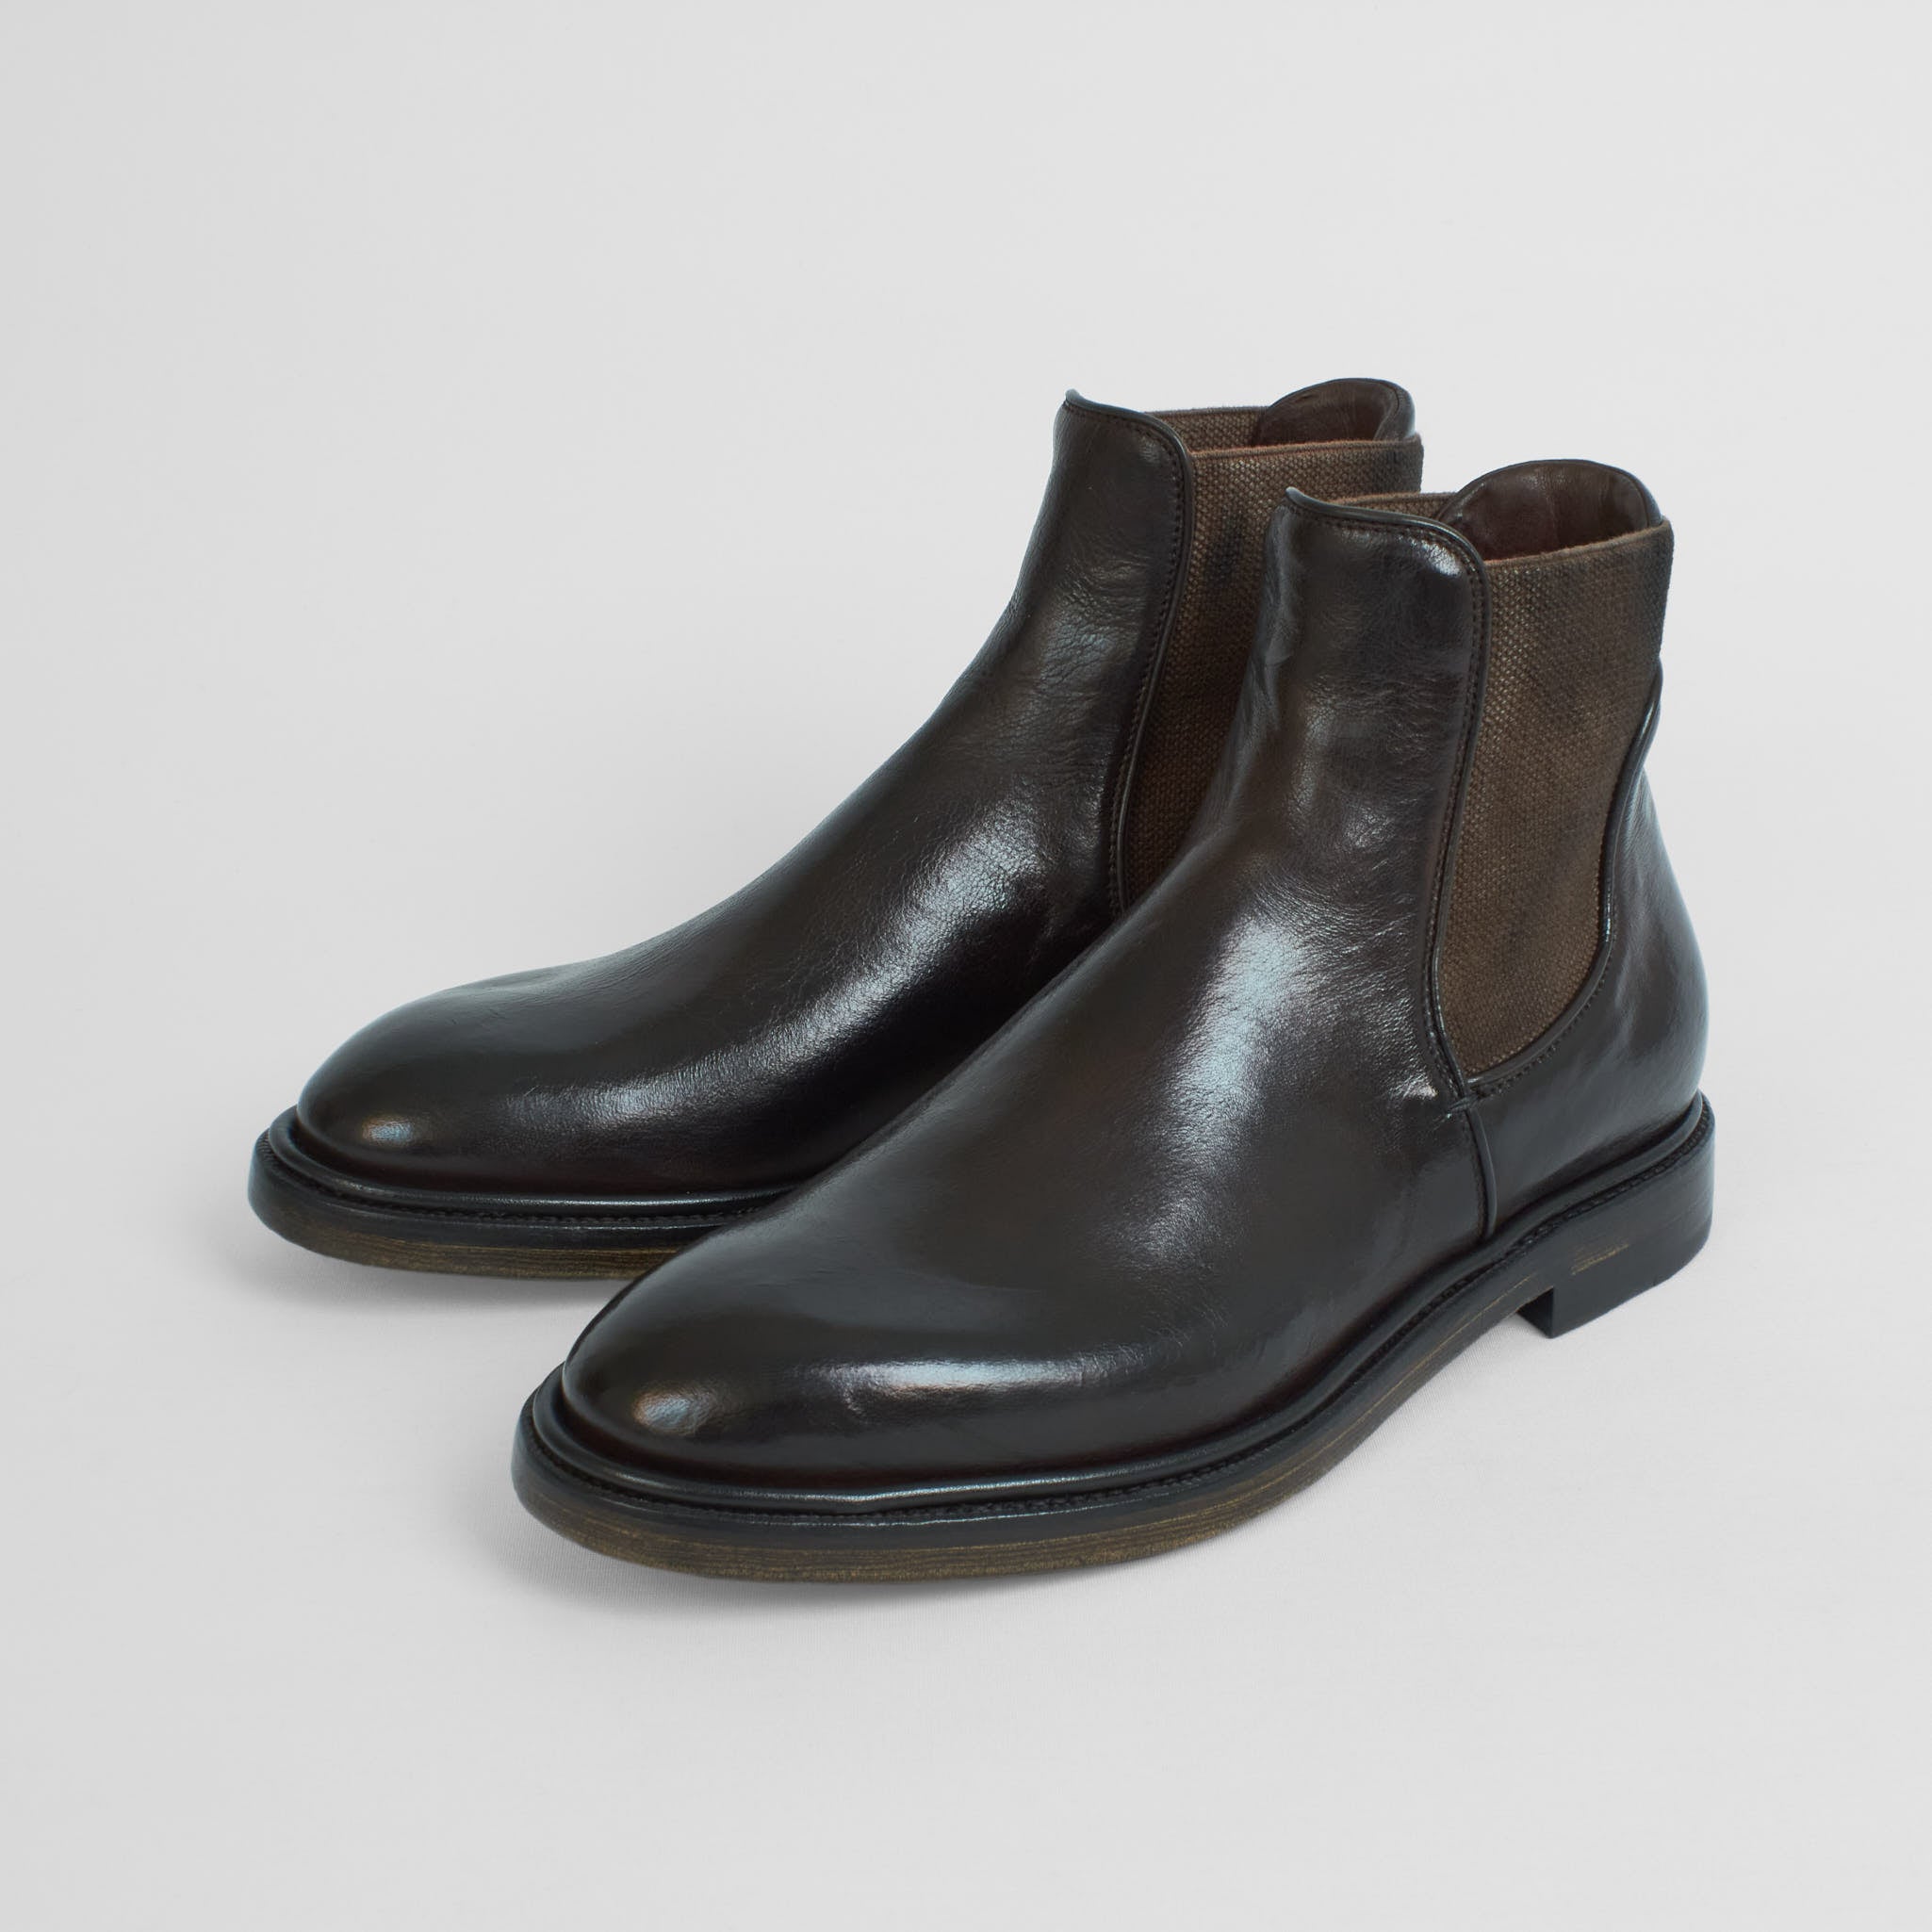 Silvano Sassetti Goodyear Welted Chelsea Boot - DeeCee style